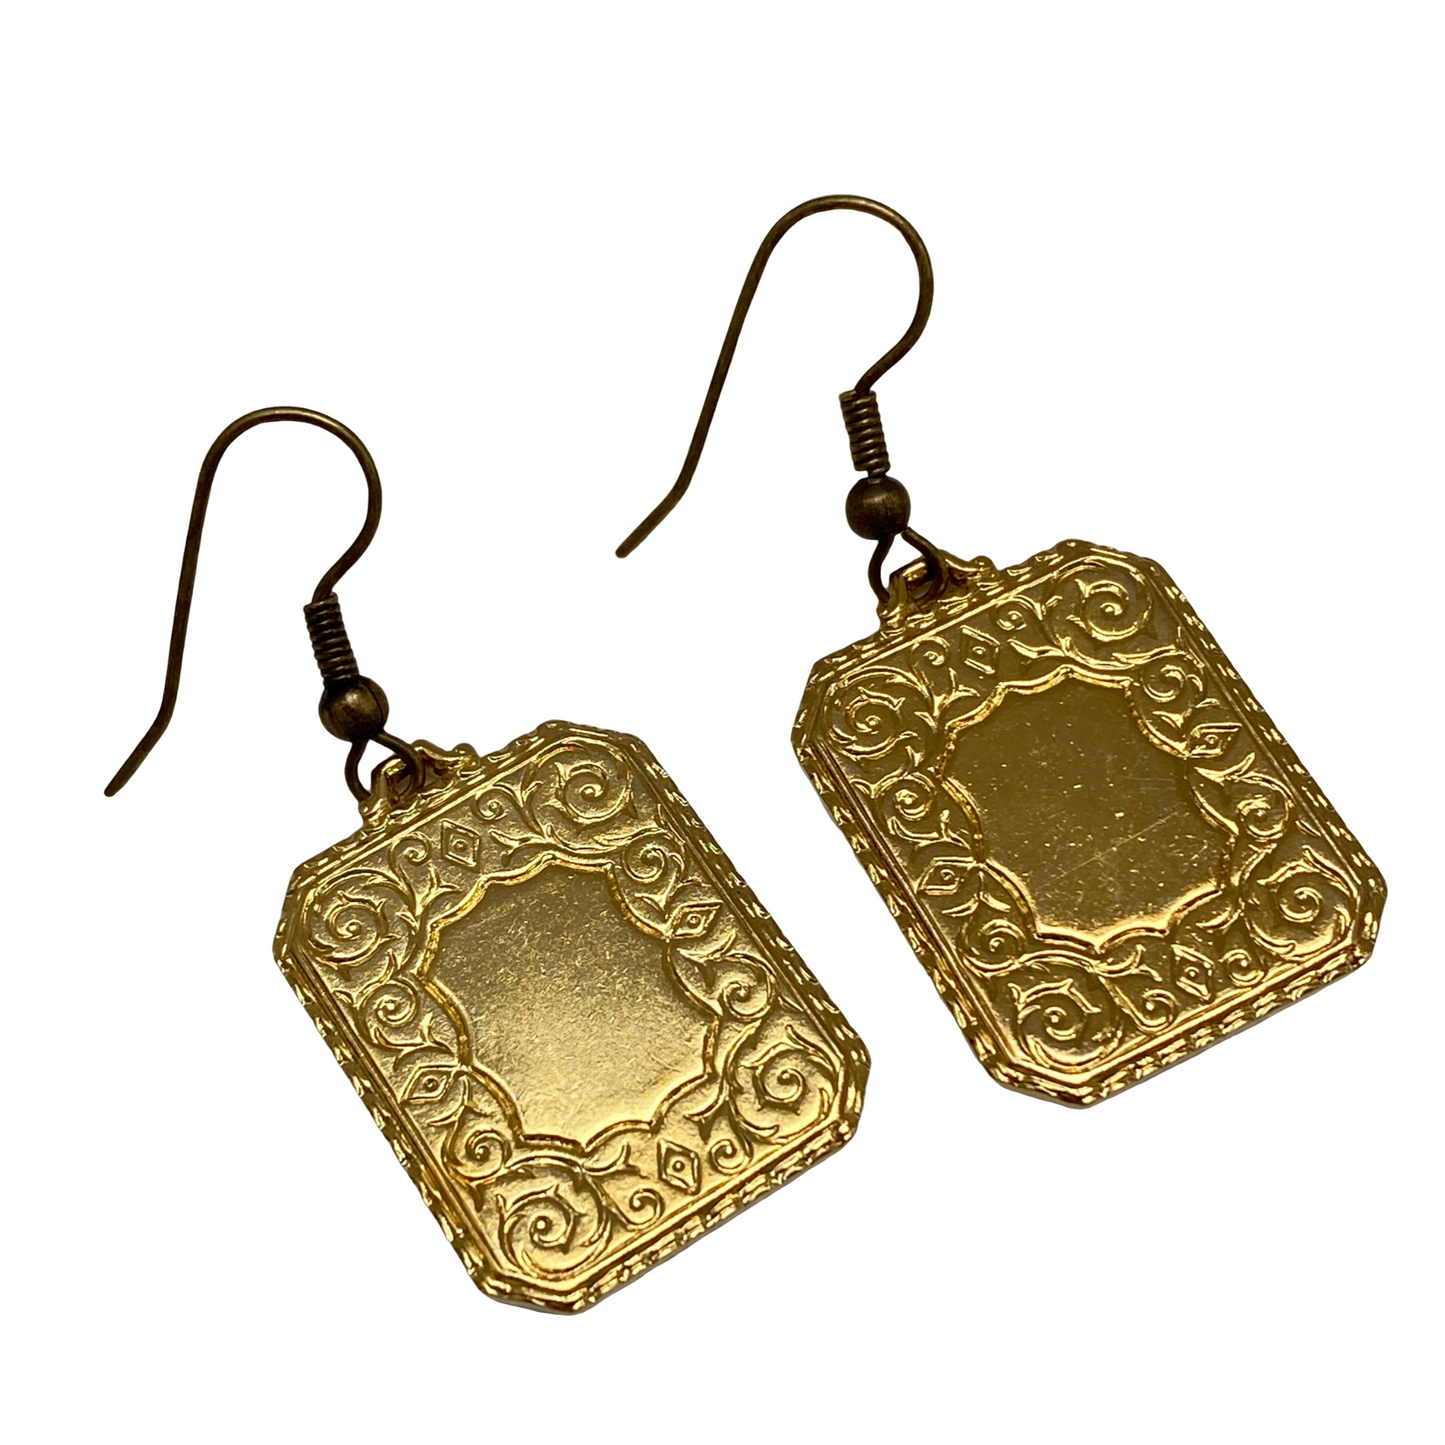 Earrings Vintage Gold Rectangle, French Ear Wire